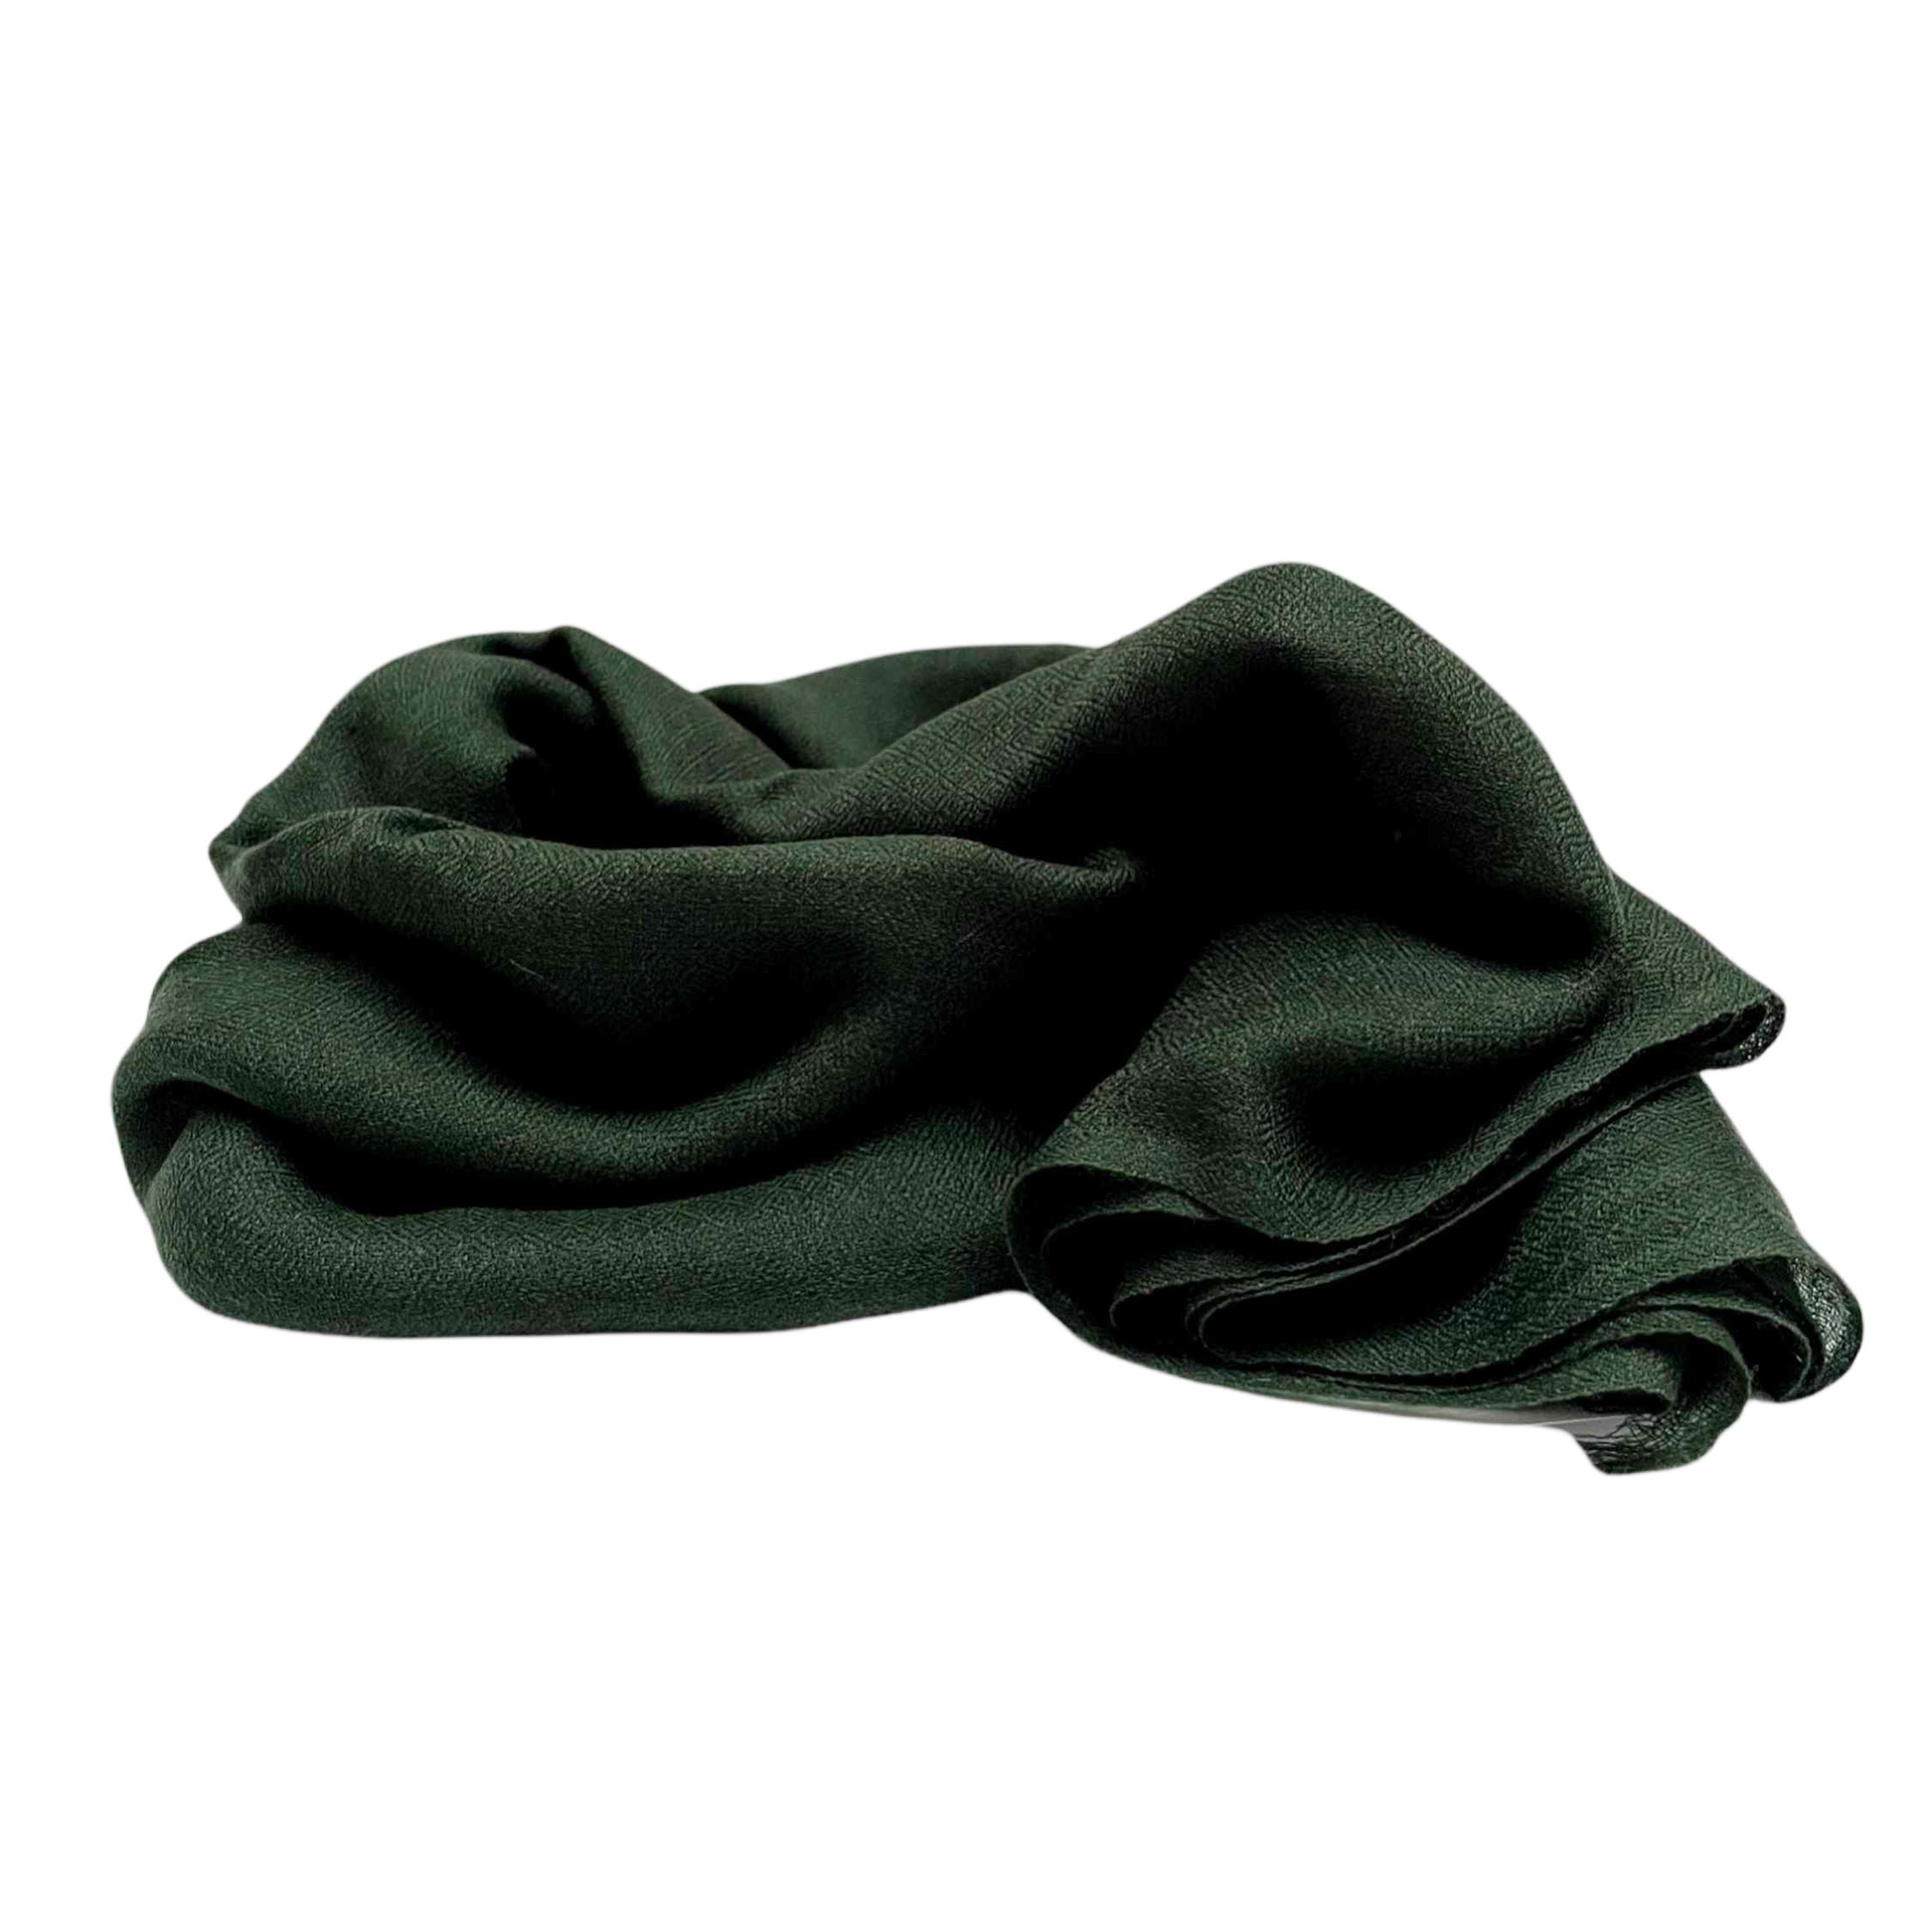 Ring Shawl,a Thin, Soft, And Light Shawl For All-weather Use, Two-ply Wool, Real Pashmina Wool, Green